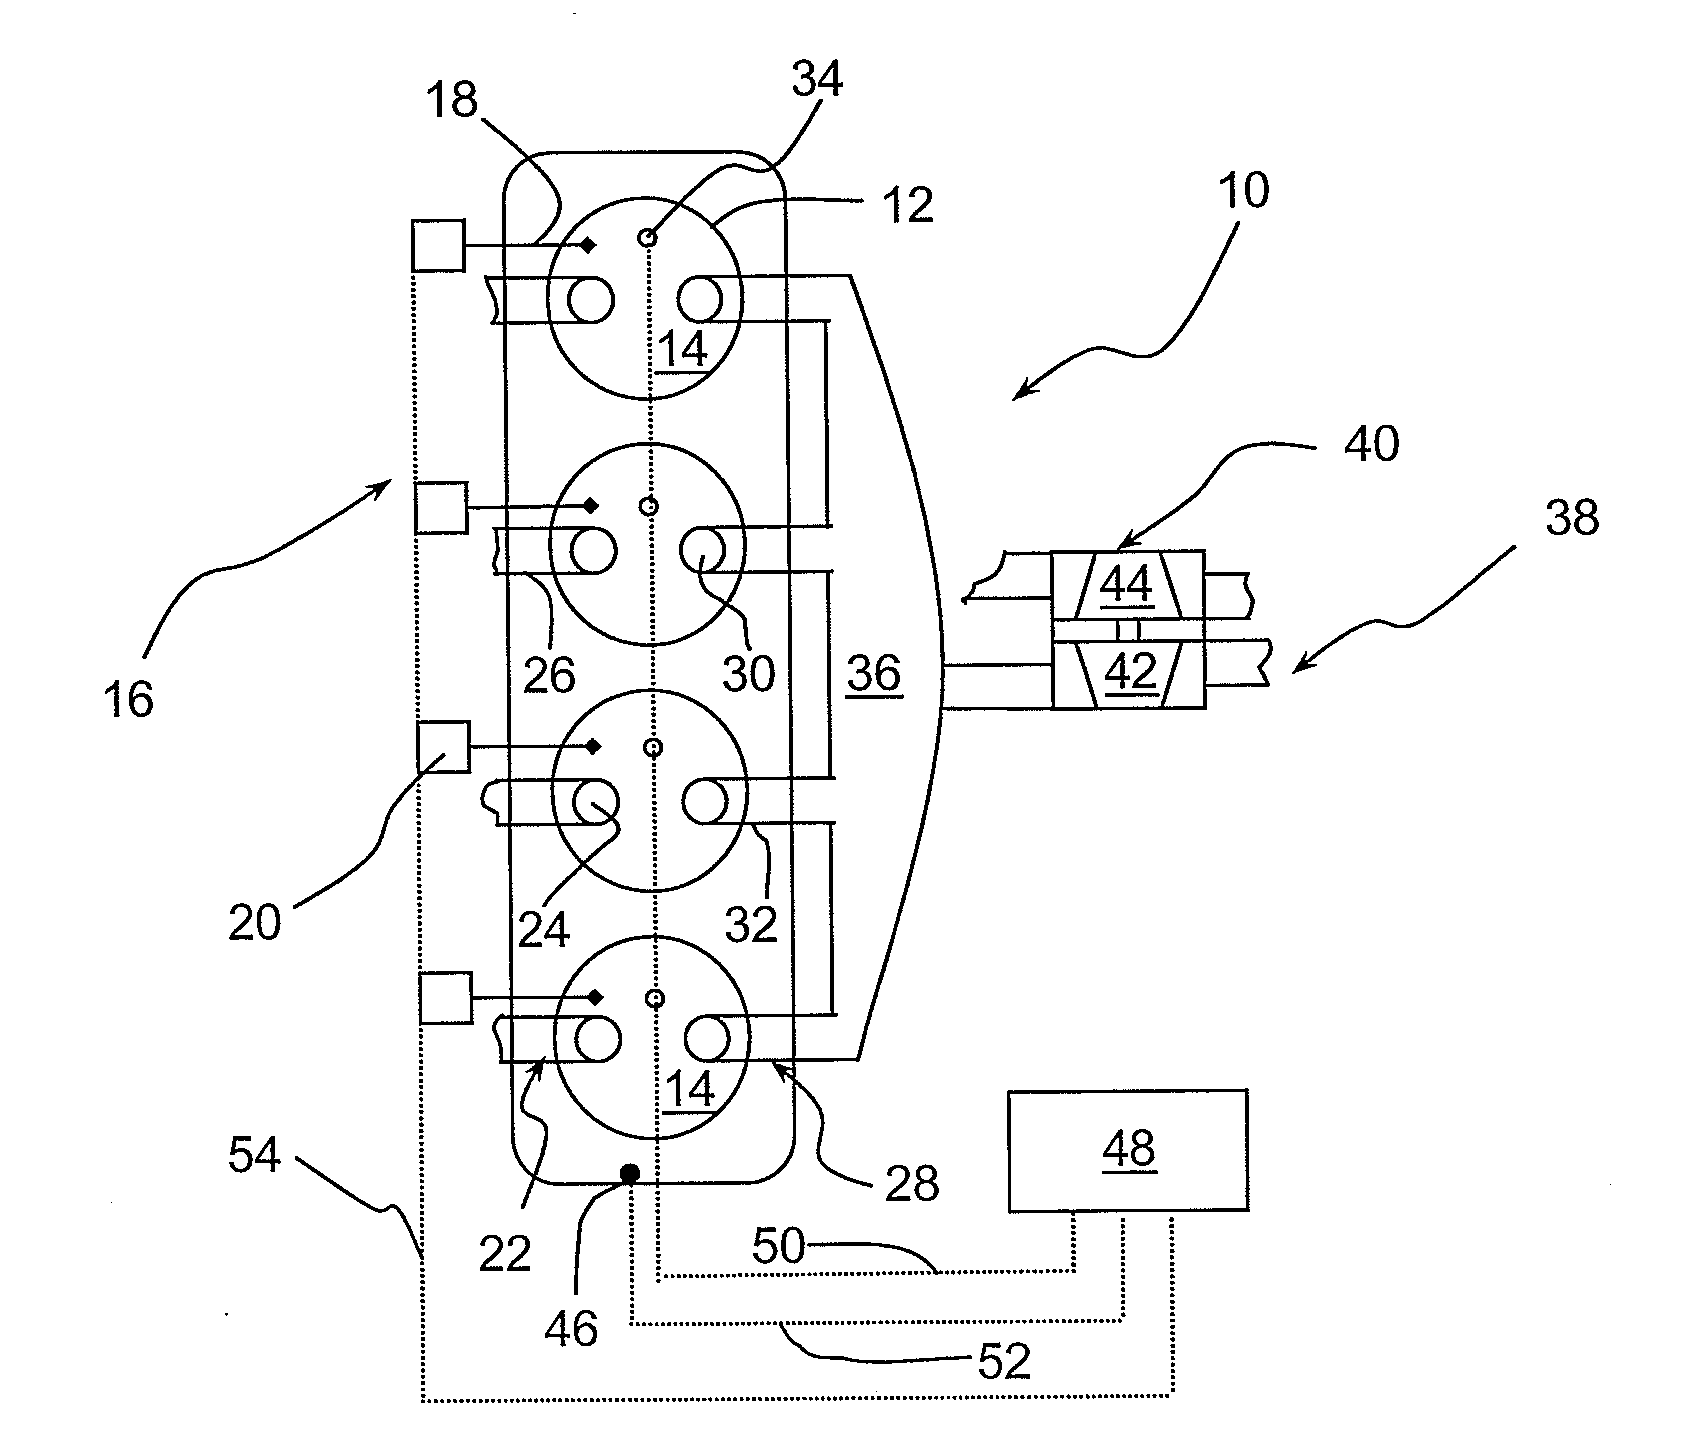 Abnormal combustion detection method for internal-combustion engines